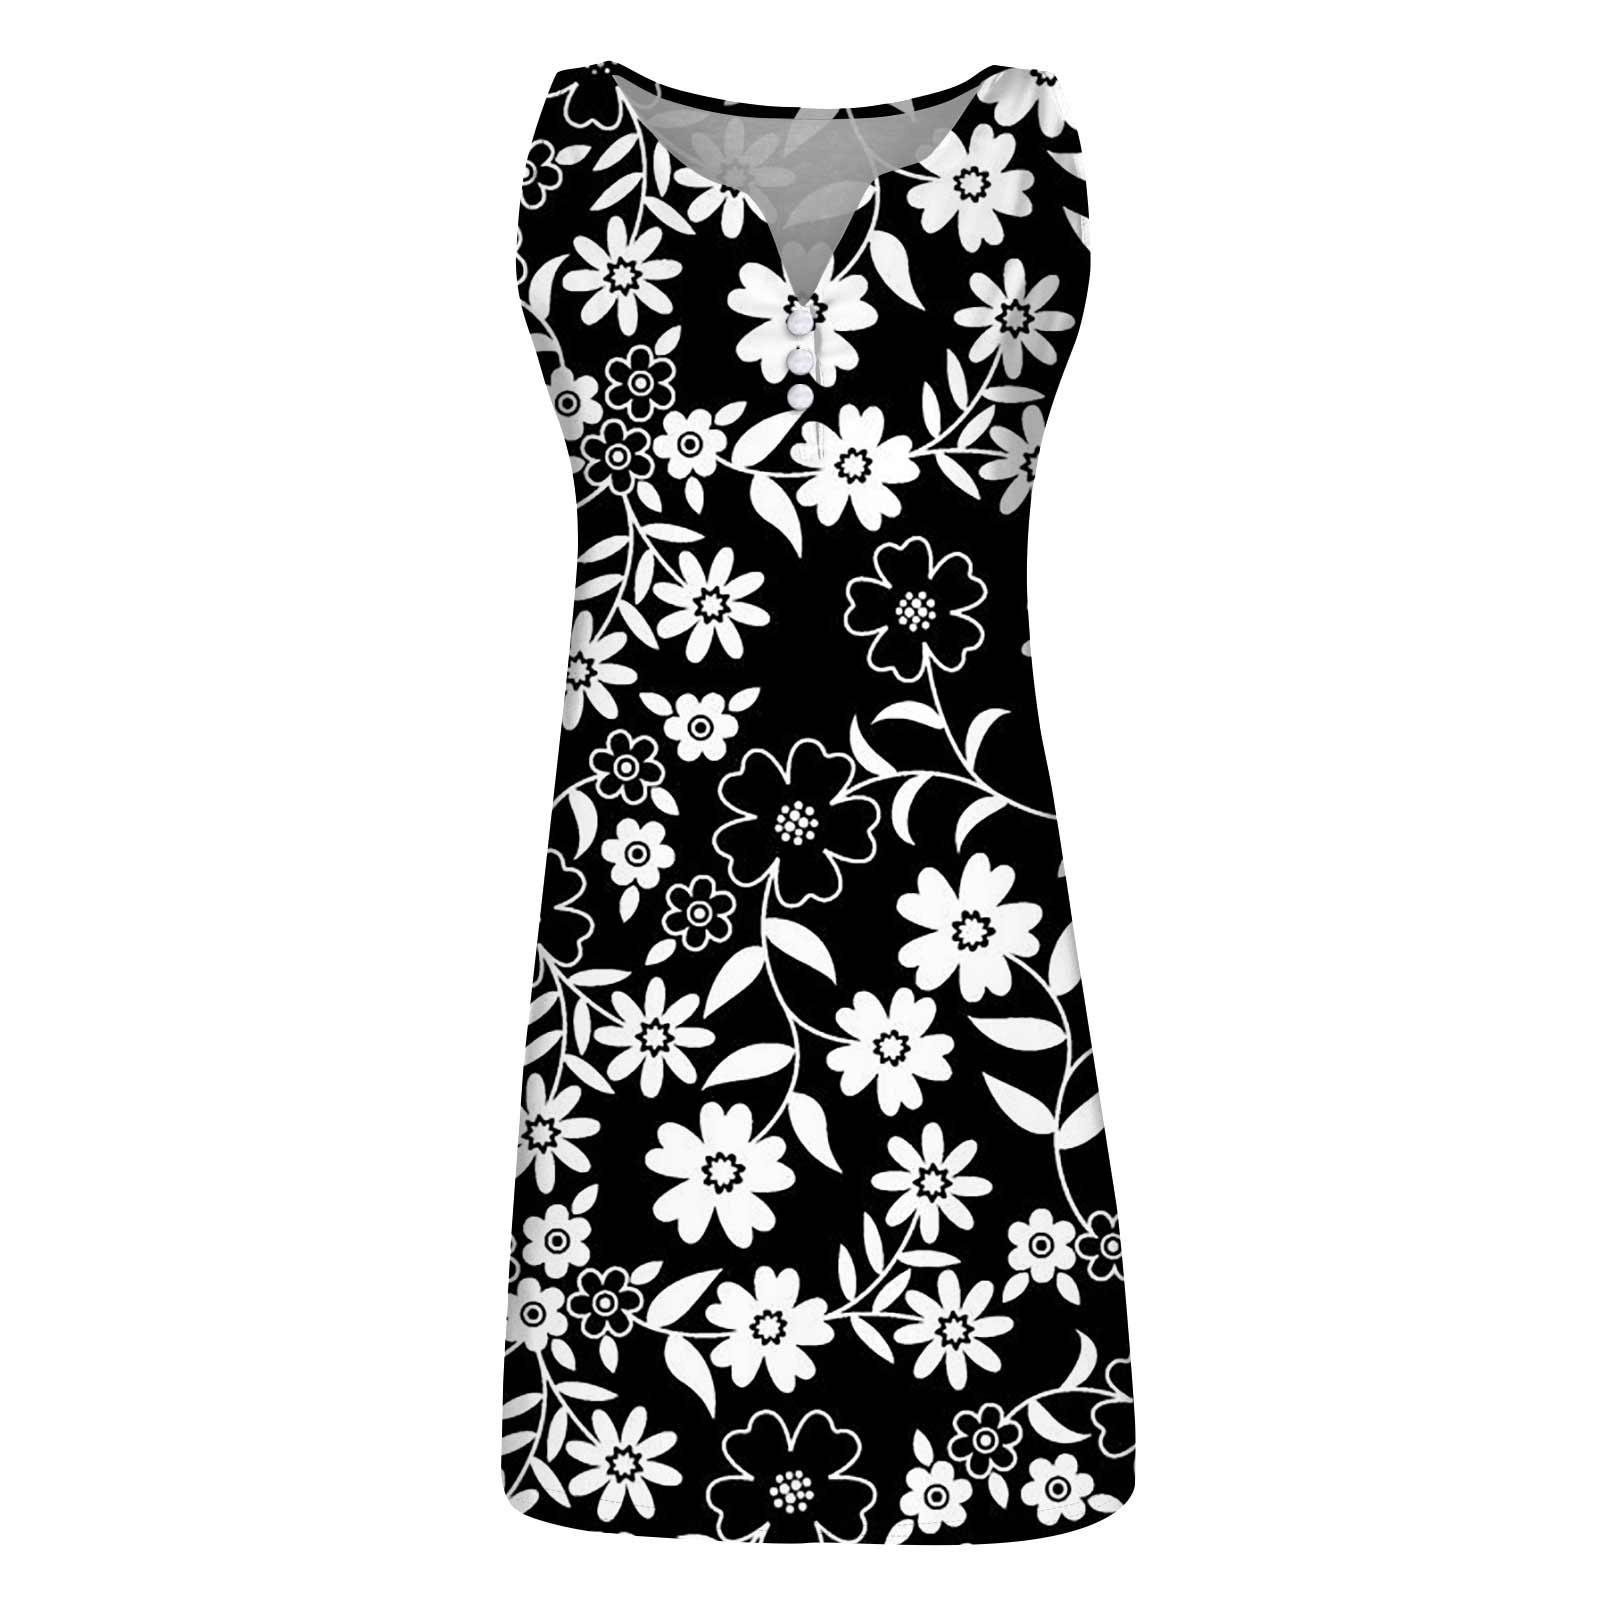 SXAURA Women's Tank Dress with Stylish Black and White Floral Print ...